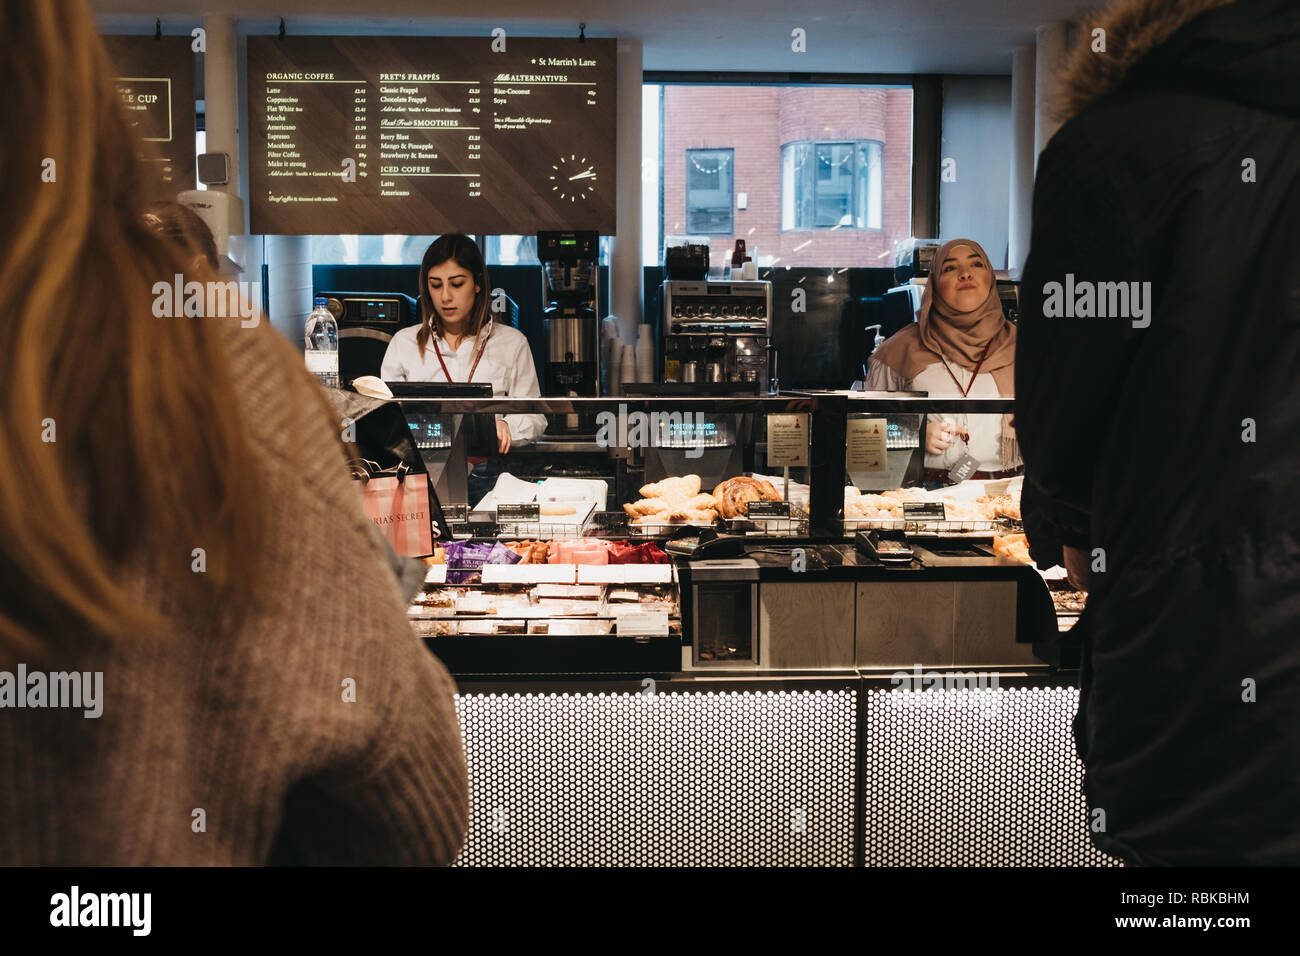 London, UK - January 5, 2018: People at the till inside Pret a Manger, a popular international sandwich shop chain that is based in UK and has approxi Stock Photo